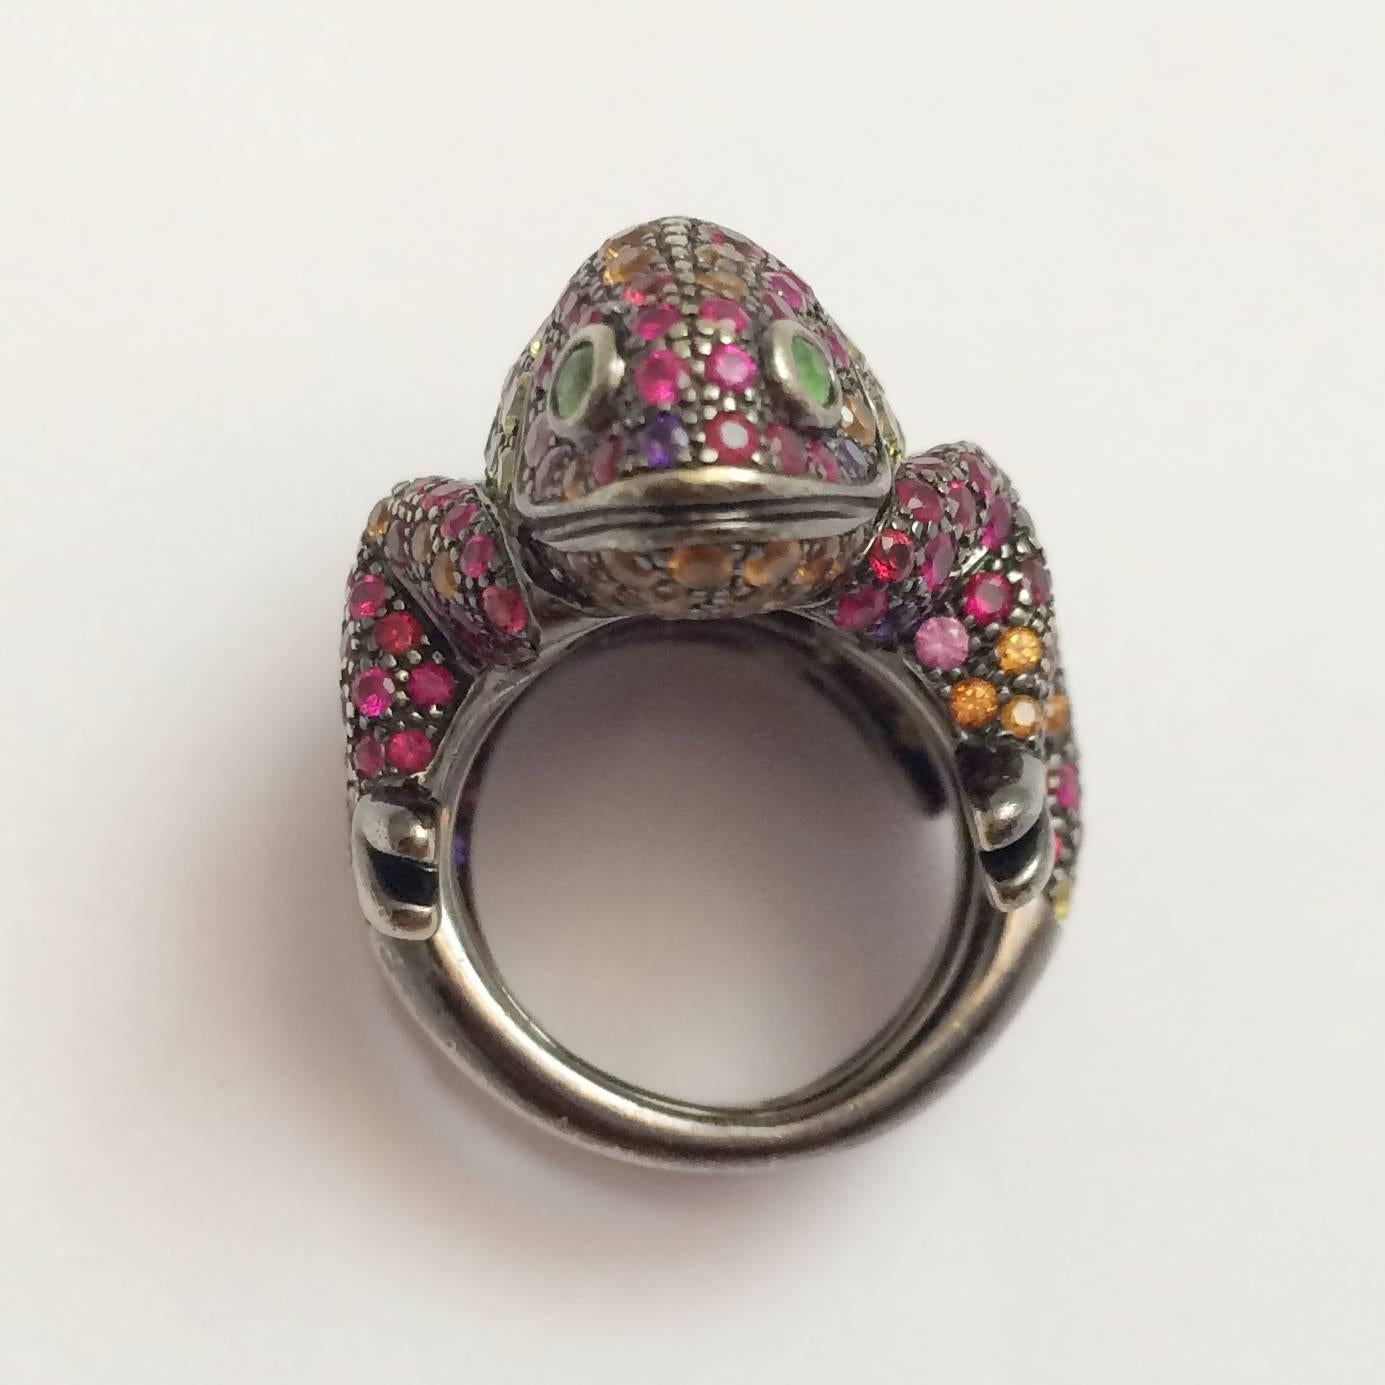 A 750/000 blackened gold Boucheron ring, made as a chameleon entirely set with multicolored sapphires, rubies and tsavorites. 
length : 23 mm. 
Width : 22 mm. 
Height on the finger : 11 mm. 
Finger size : 5 1/4 can be very slightly sized. 
Net